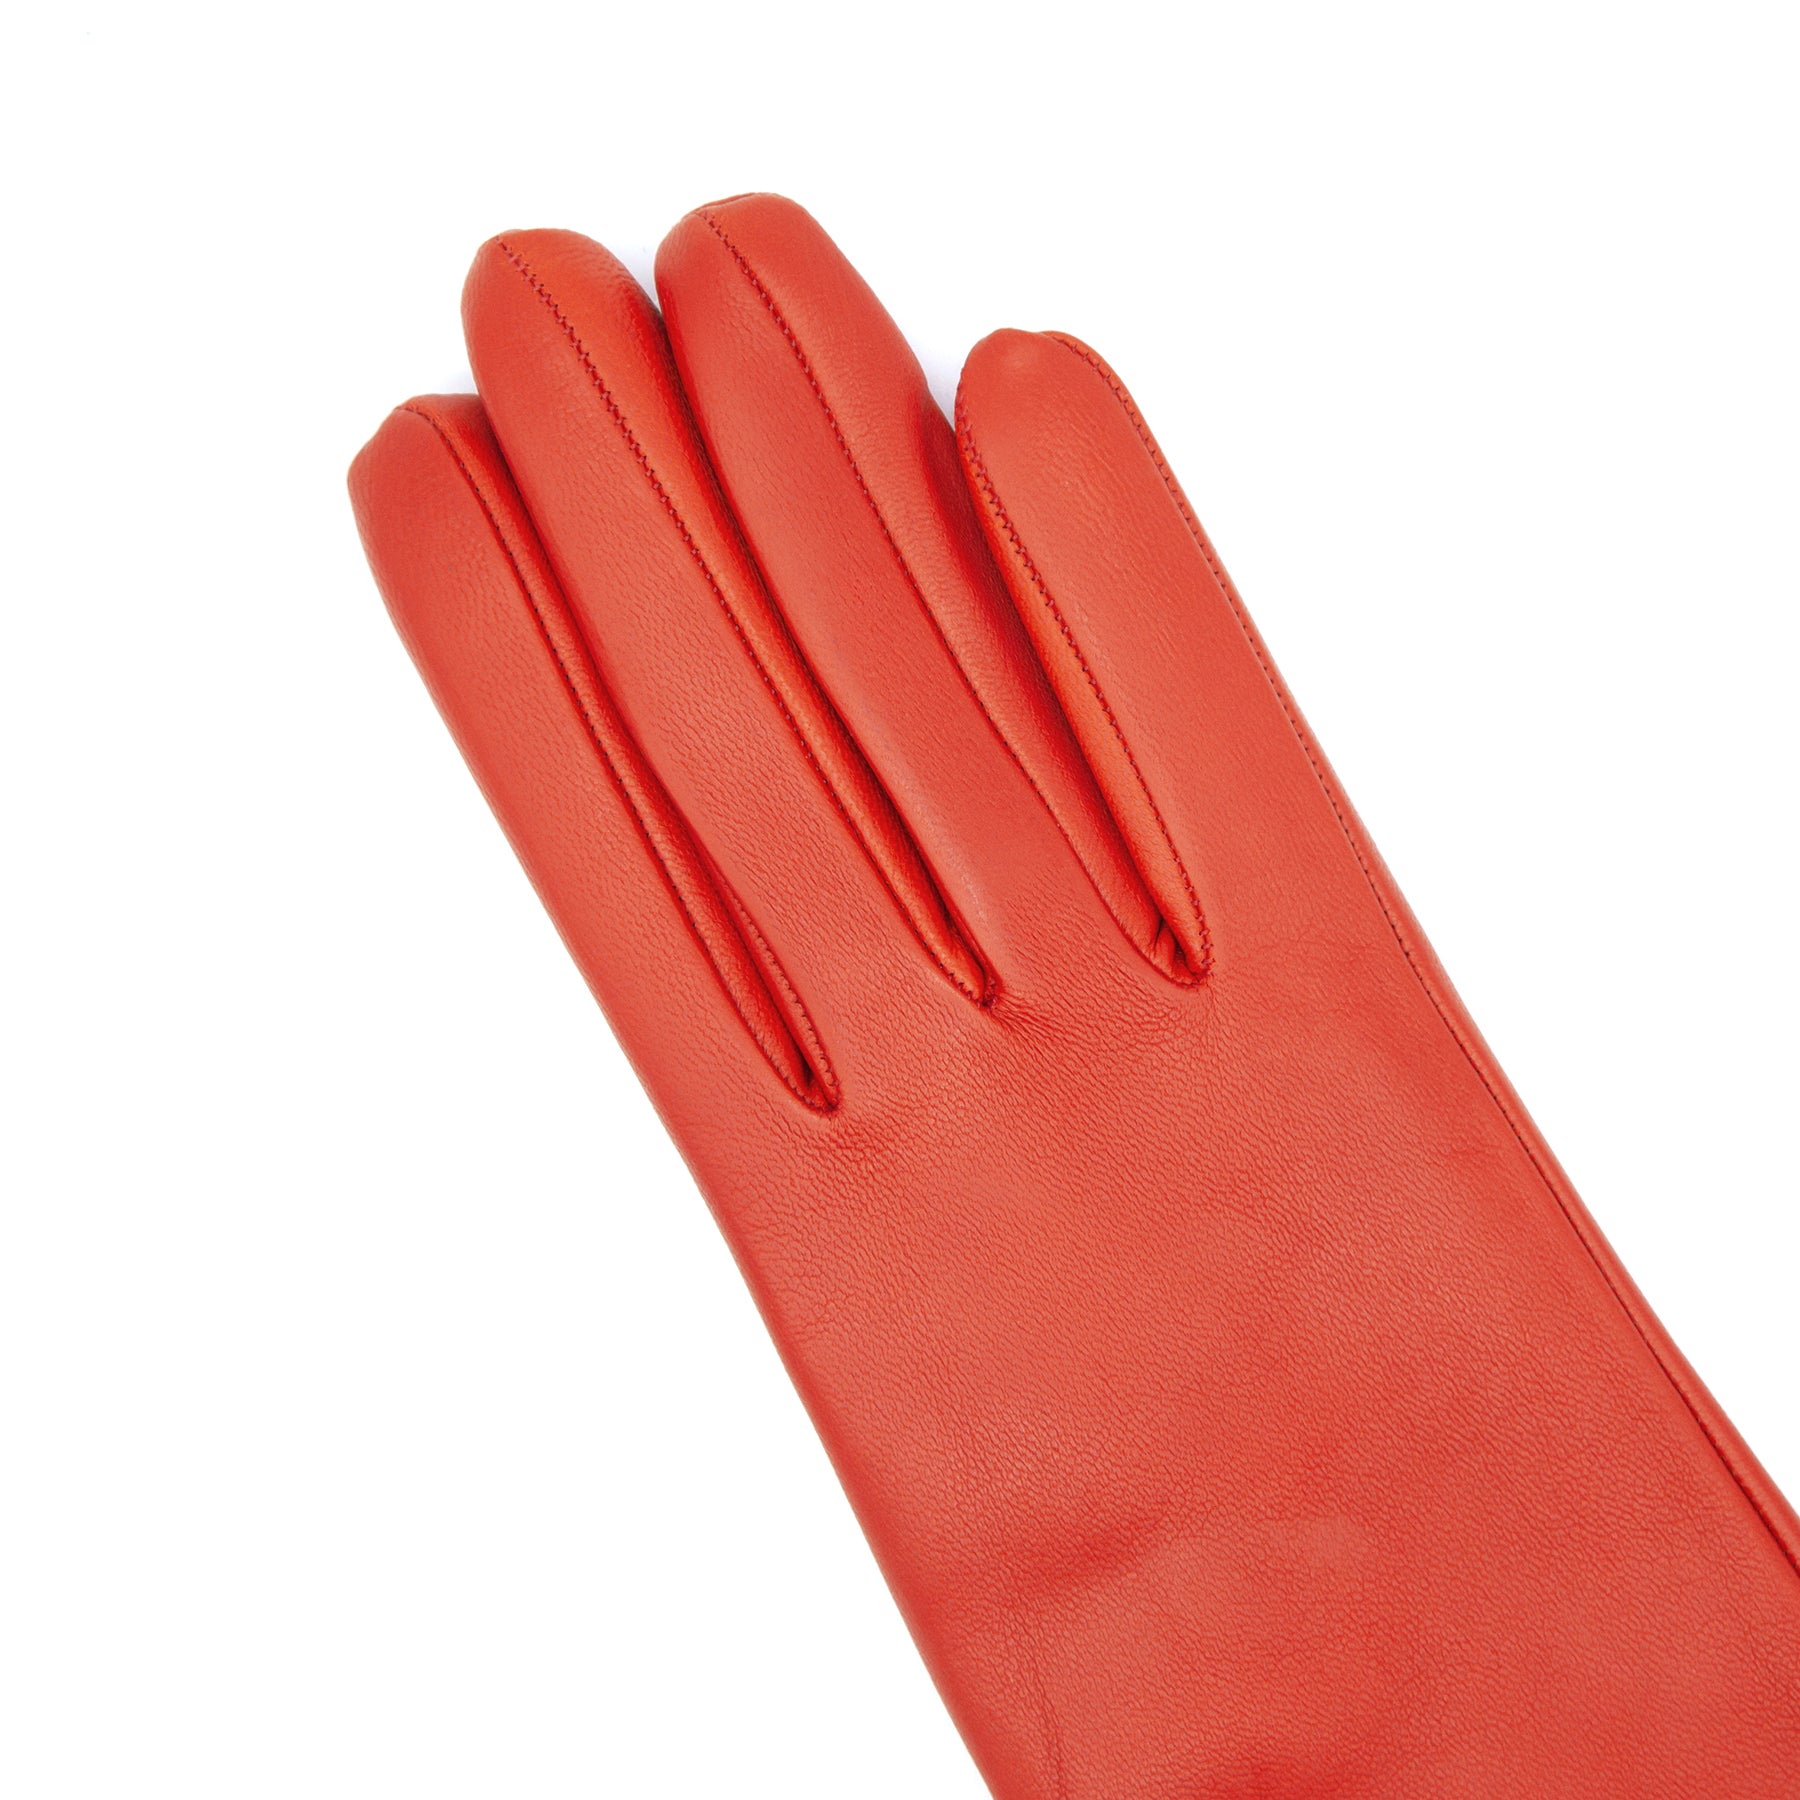 Women's classic orange metal free nappa leather gloves with natural cashmere lining